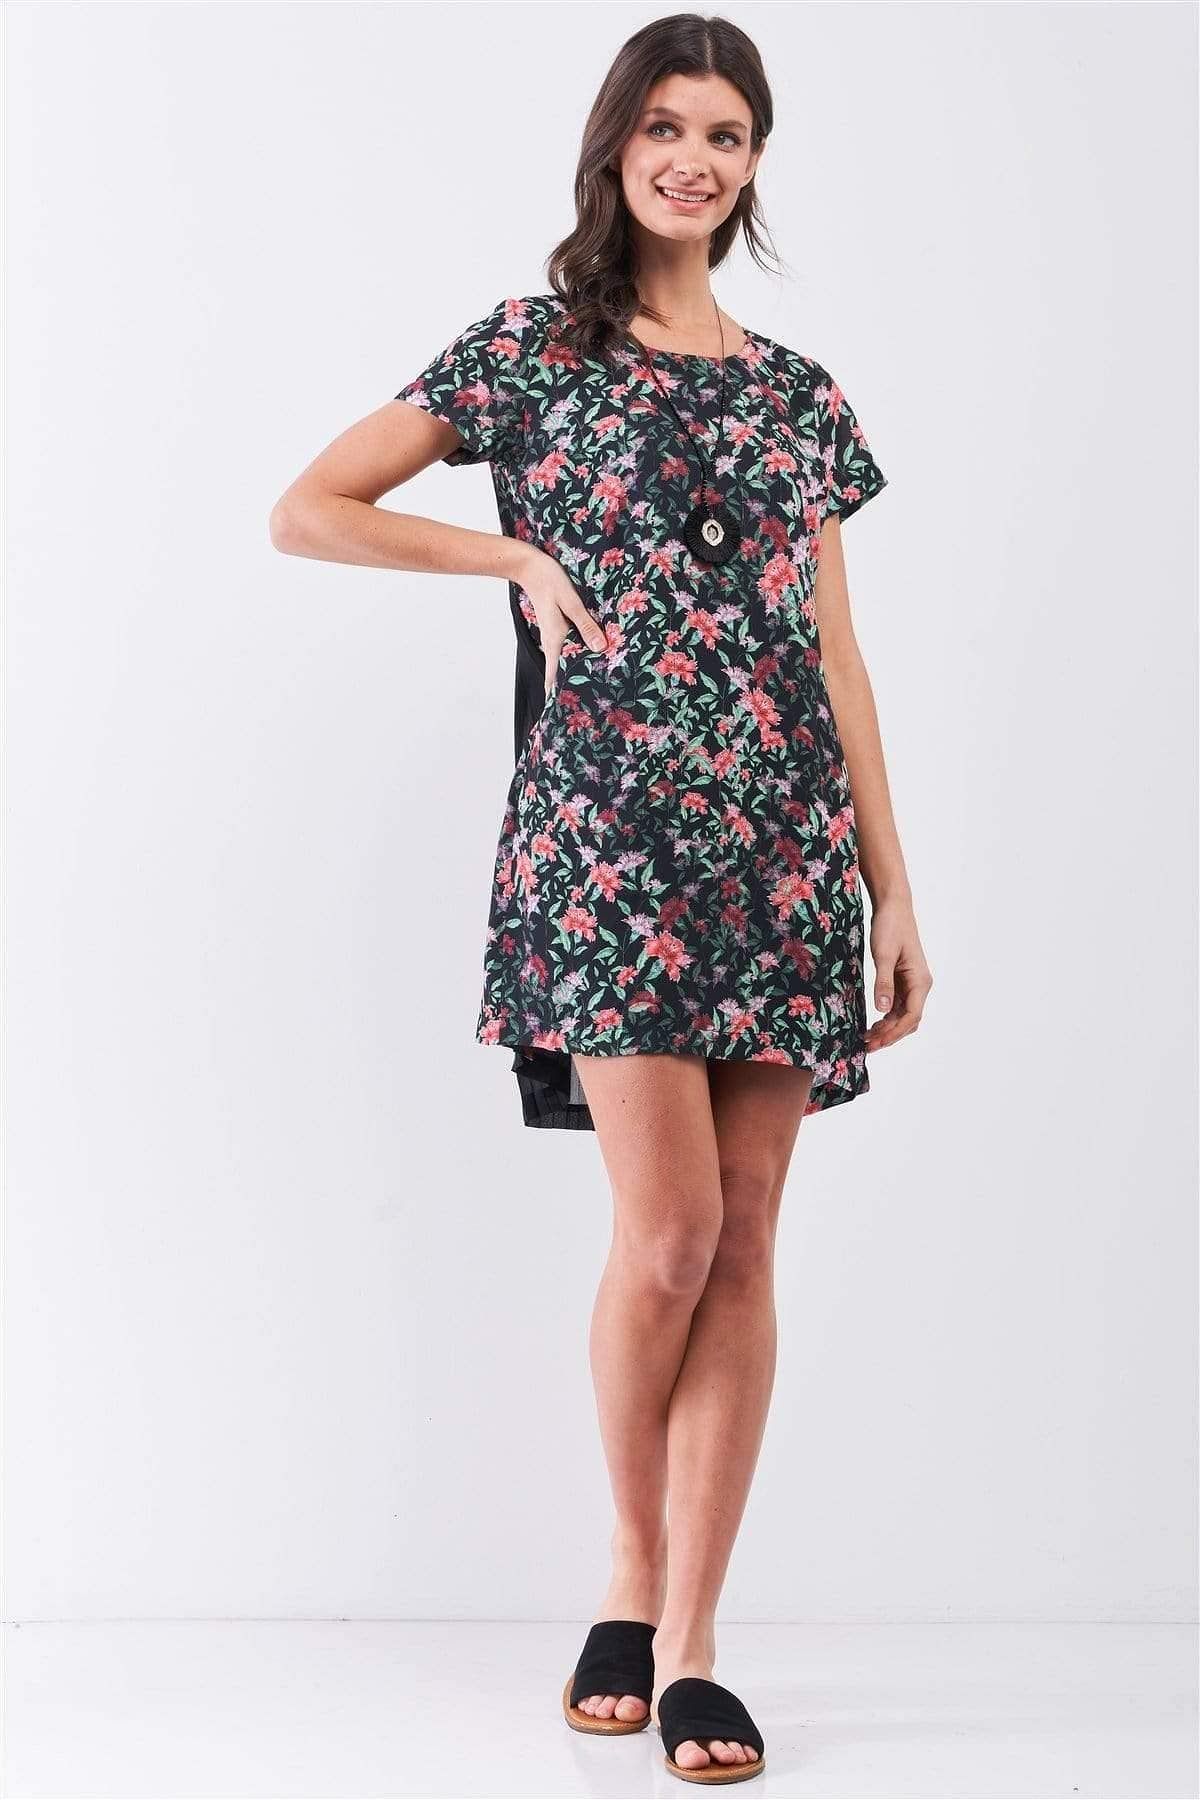 Short Sleeve Floral Print Mini Dress - Shopping Therapy